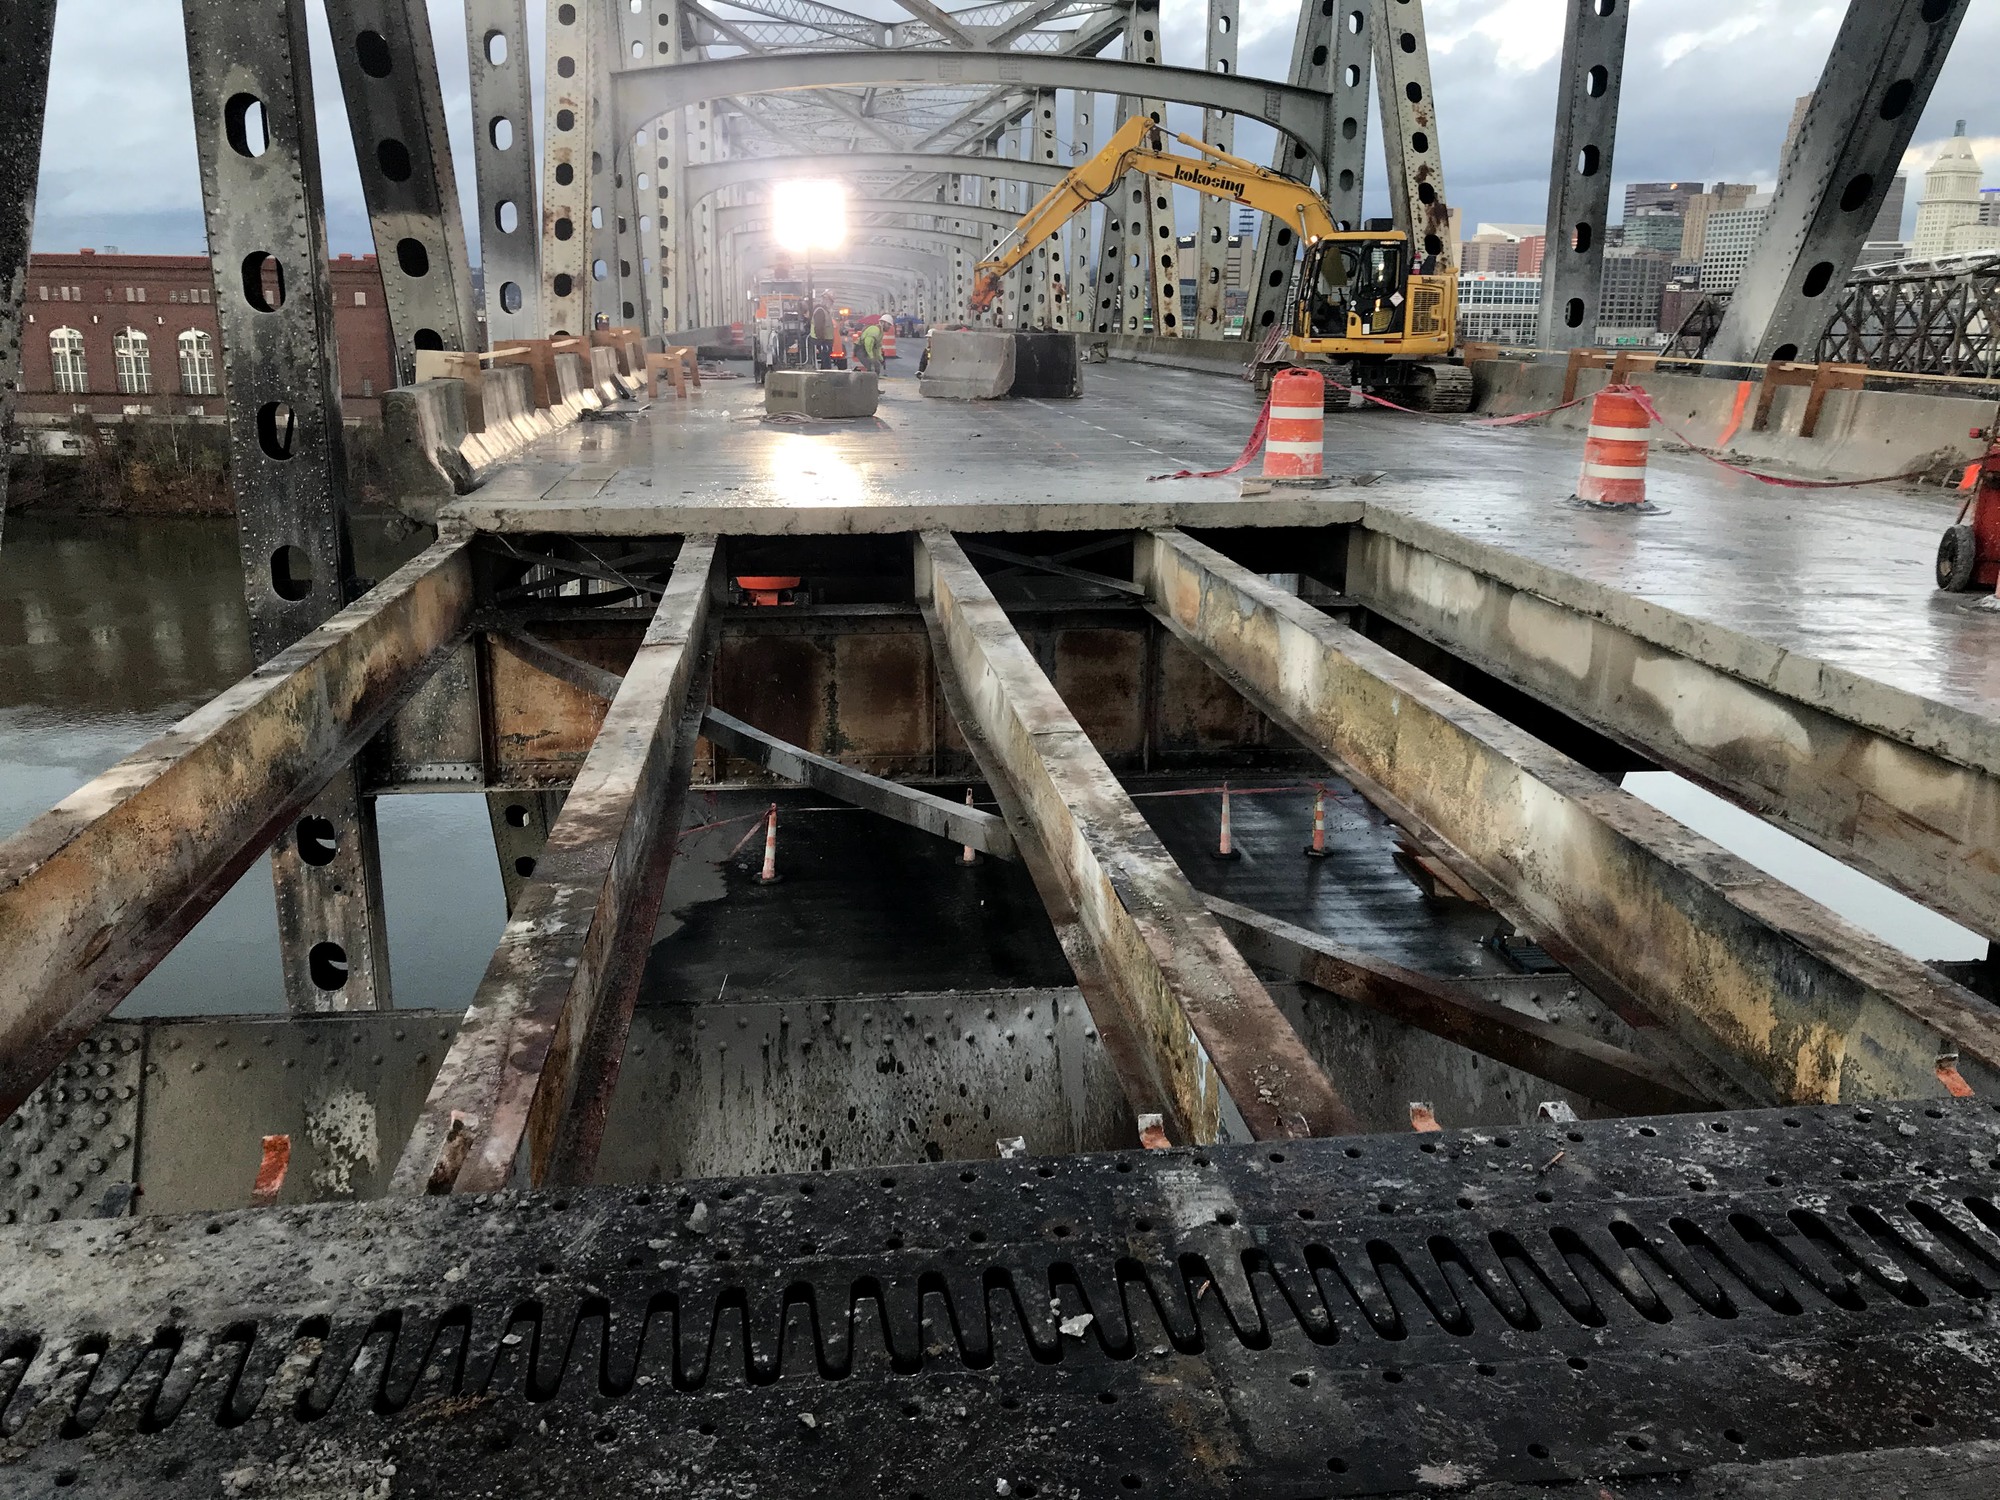 partially removed decking allows the structural supports of the Brent Spence Bridge to be seen